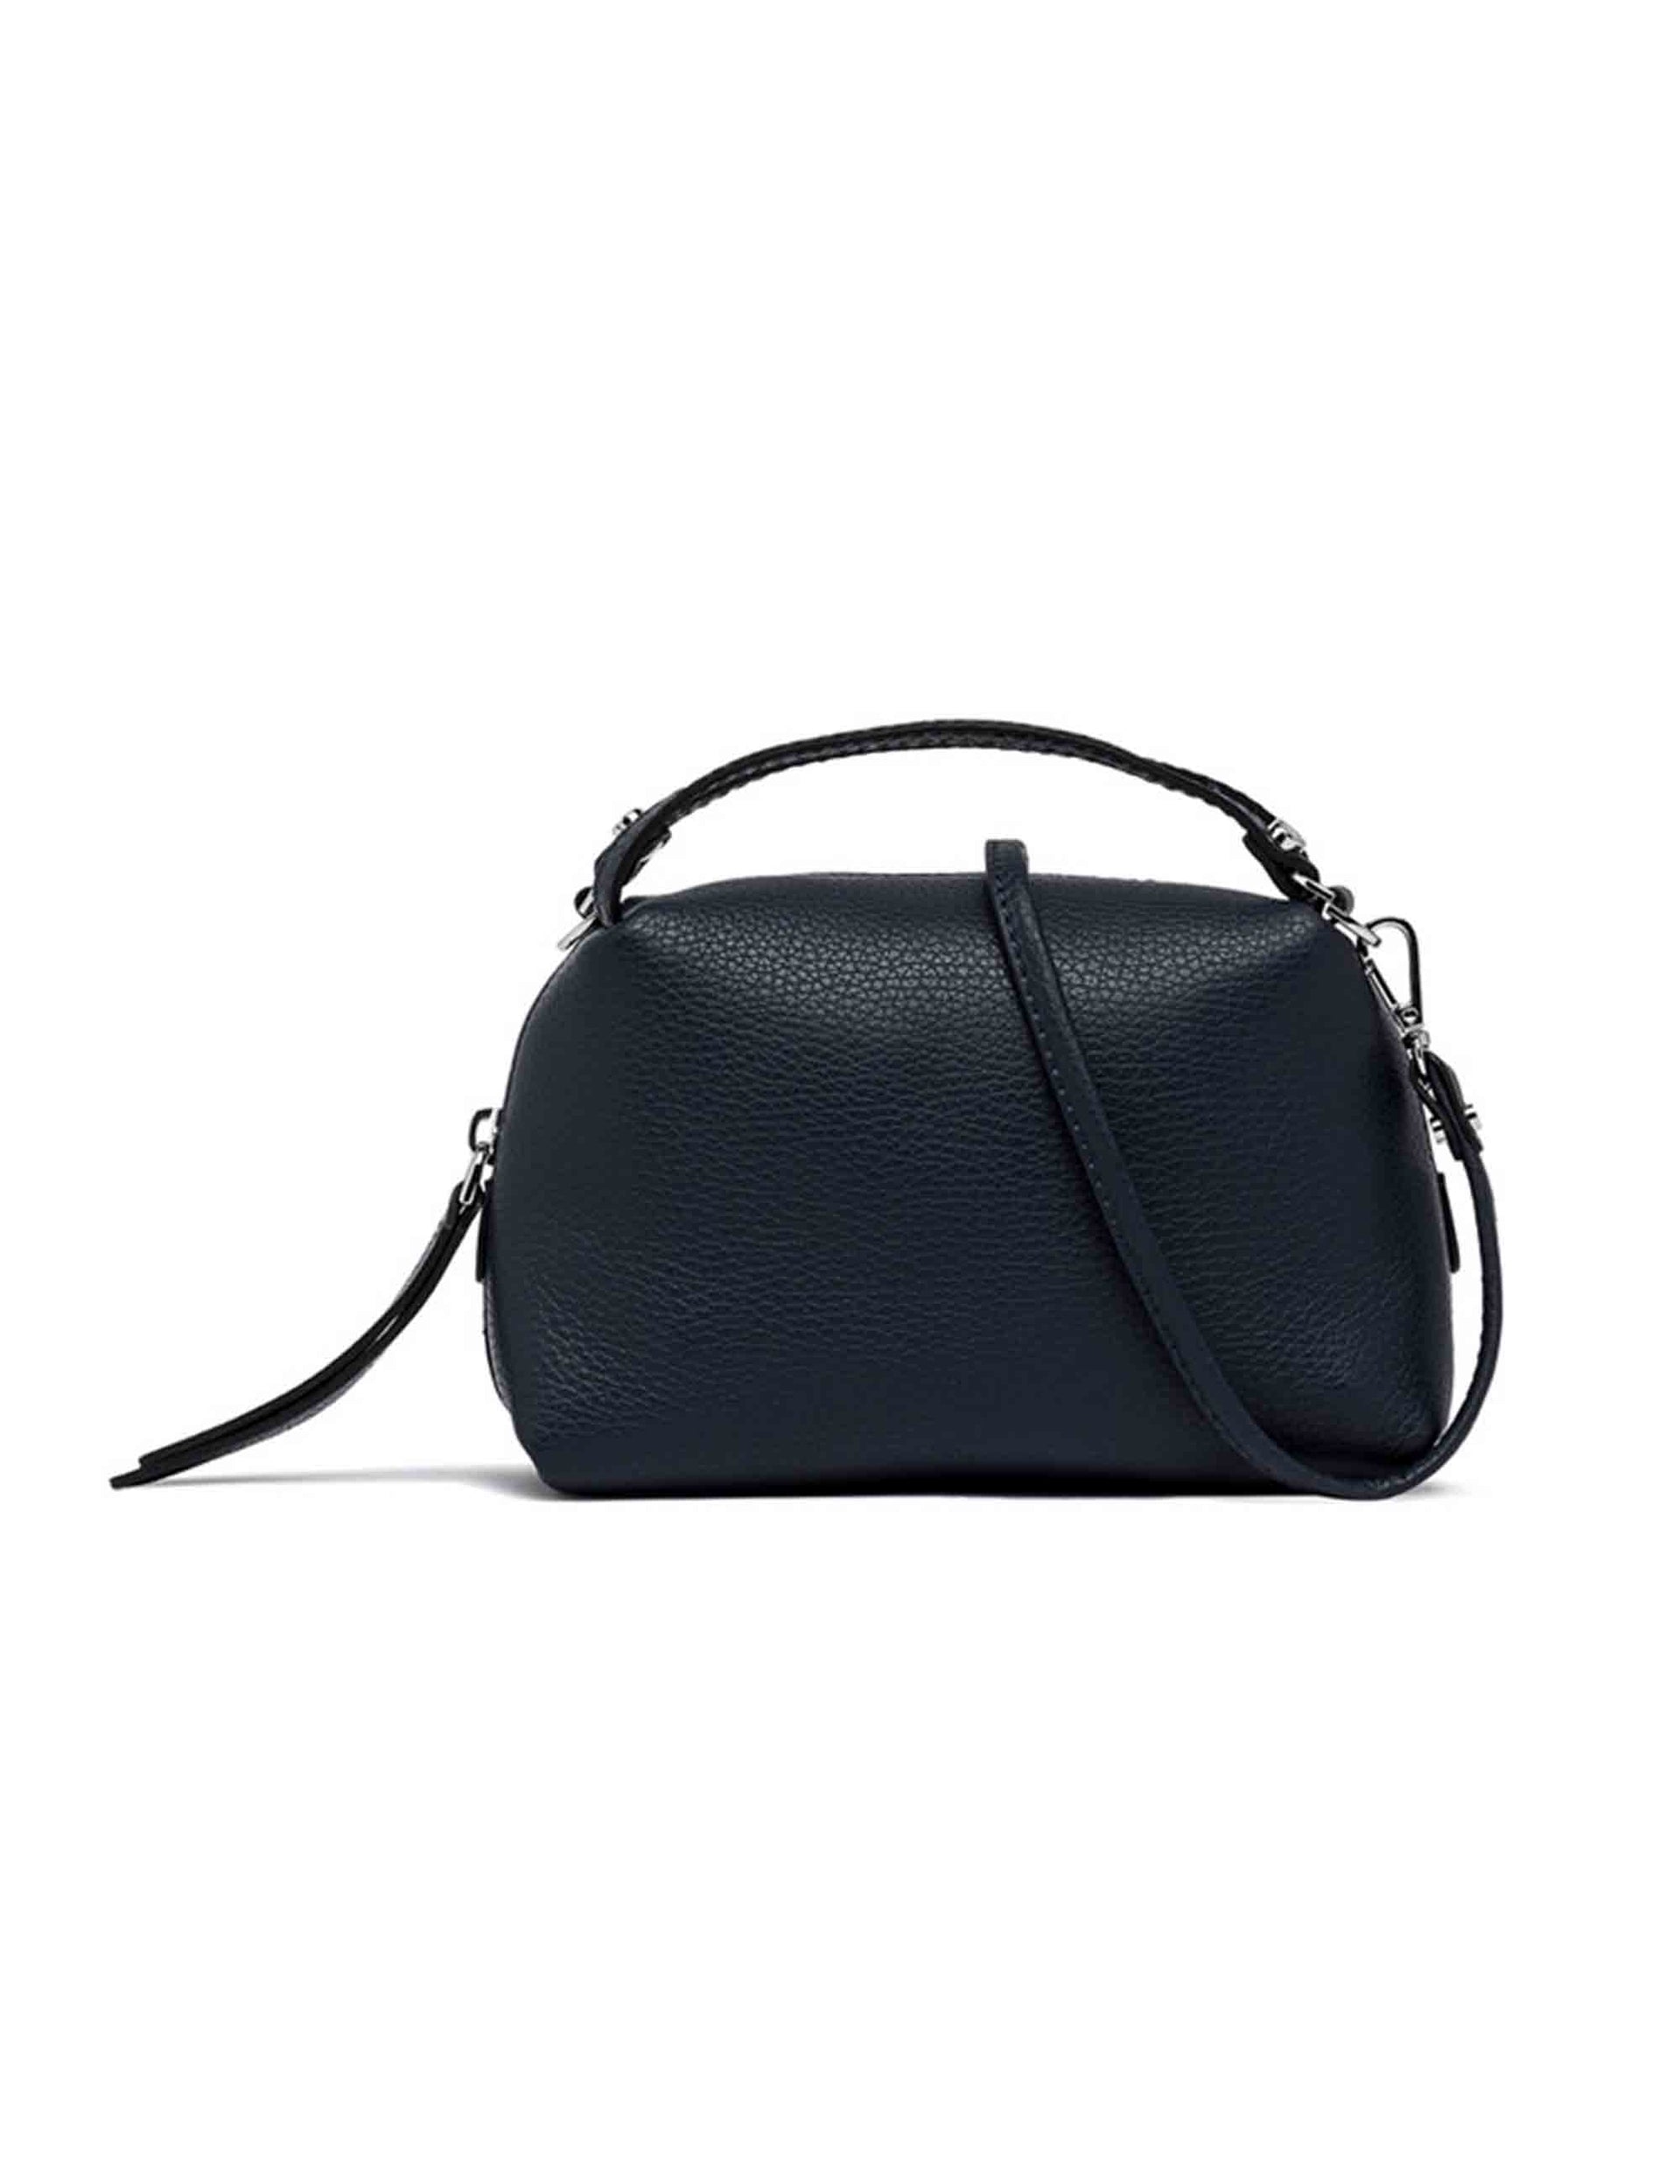 Alifa women's handbags in navy blue leather with removable shoulder strap